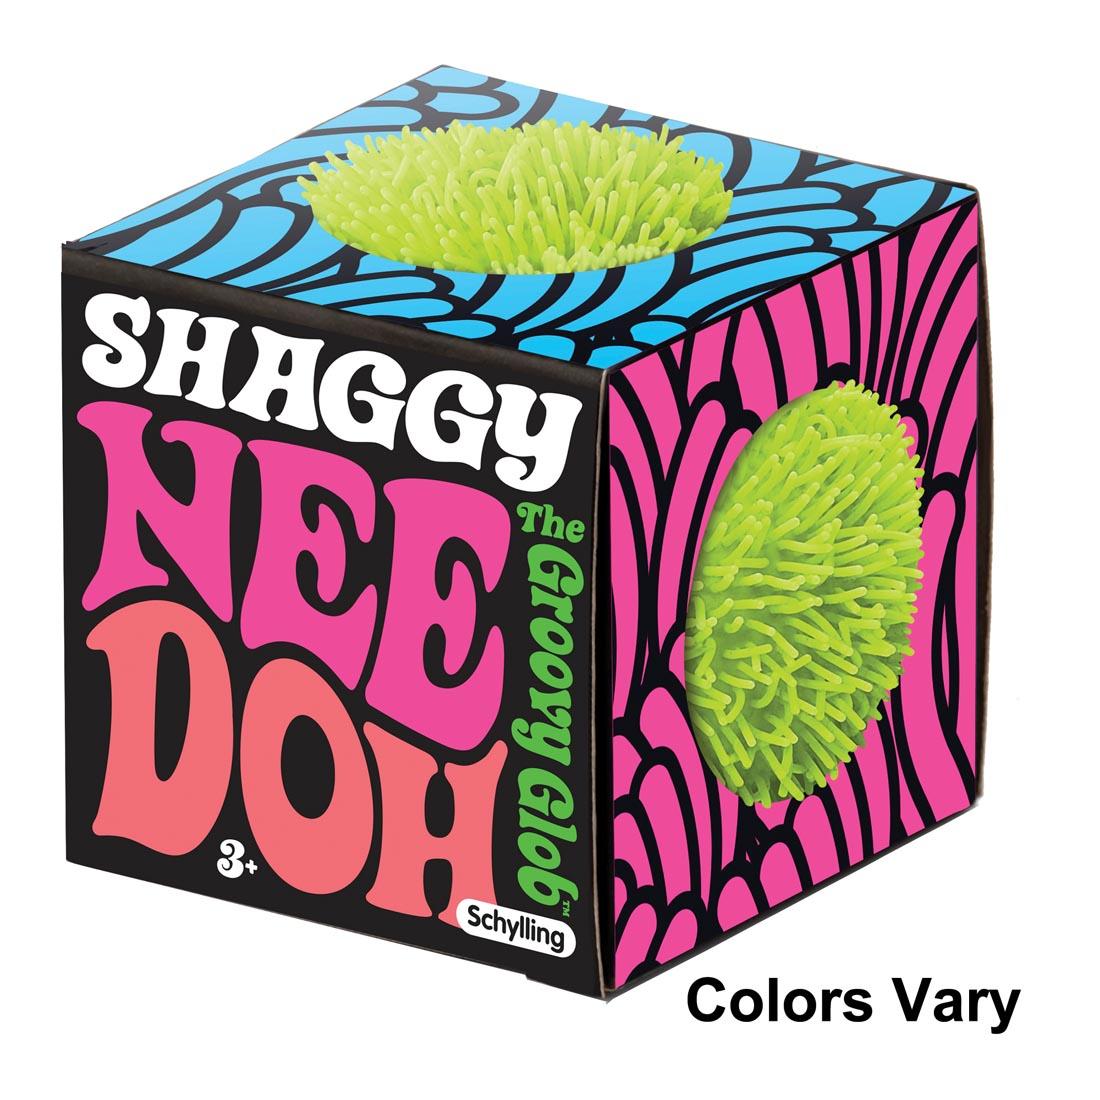 Shaggy Nee Doh with the text Colors Vary